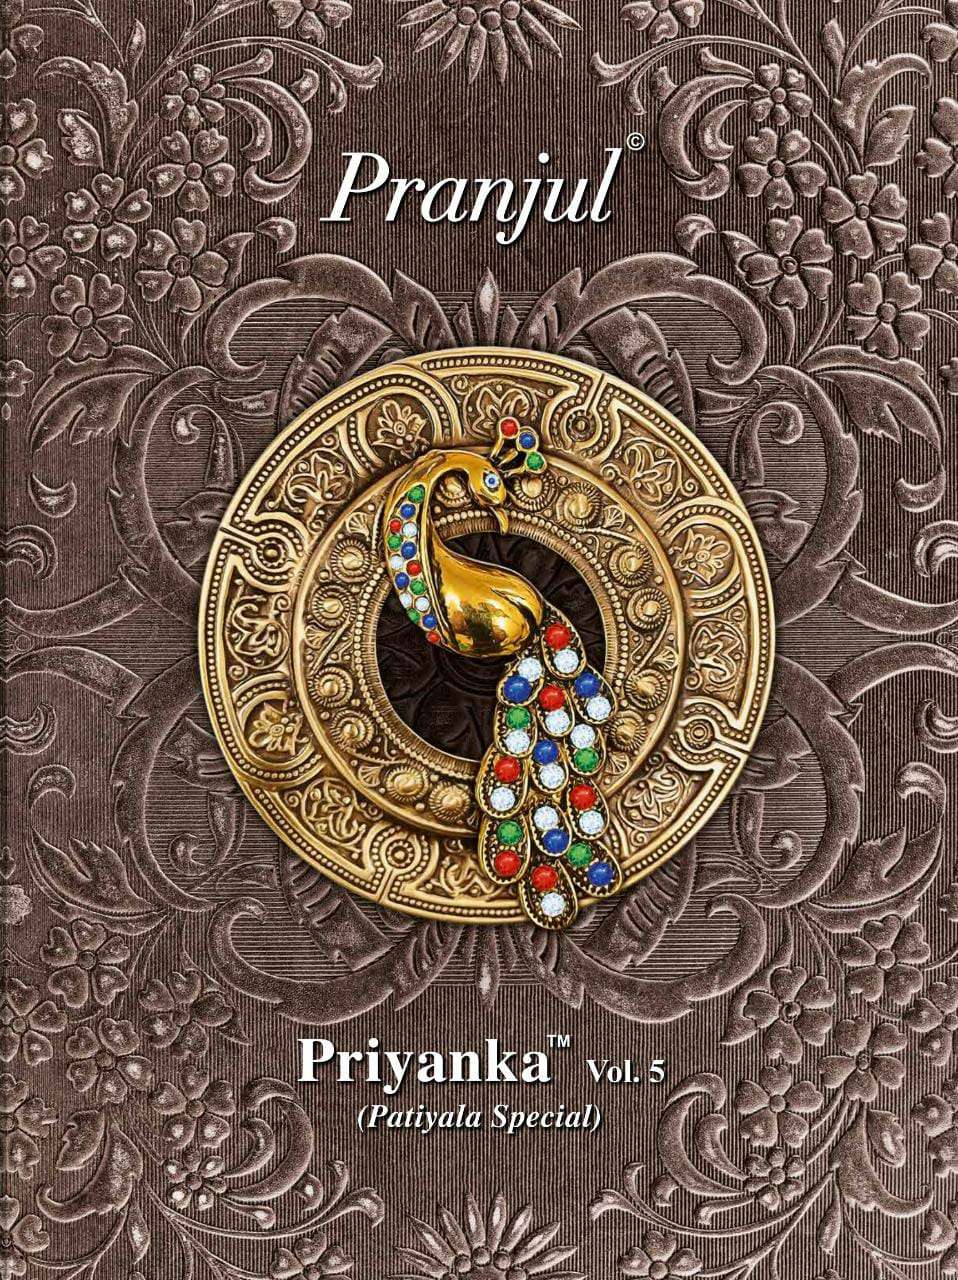 PRIYANKA VOL-5 BY PRANJUL CREATION 501 TO 530 SERIES BEAUTIFUL STYLISH PATIALA SUITS FANCY COLORFUL CASUAL WEAR & ETHNIC WEAR & READY TO WEAR COTTON PRINTED DRESSES AT WHOLESALE PRICE